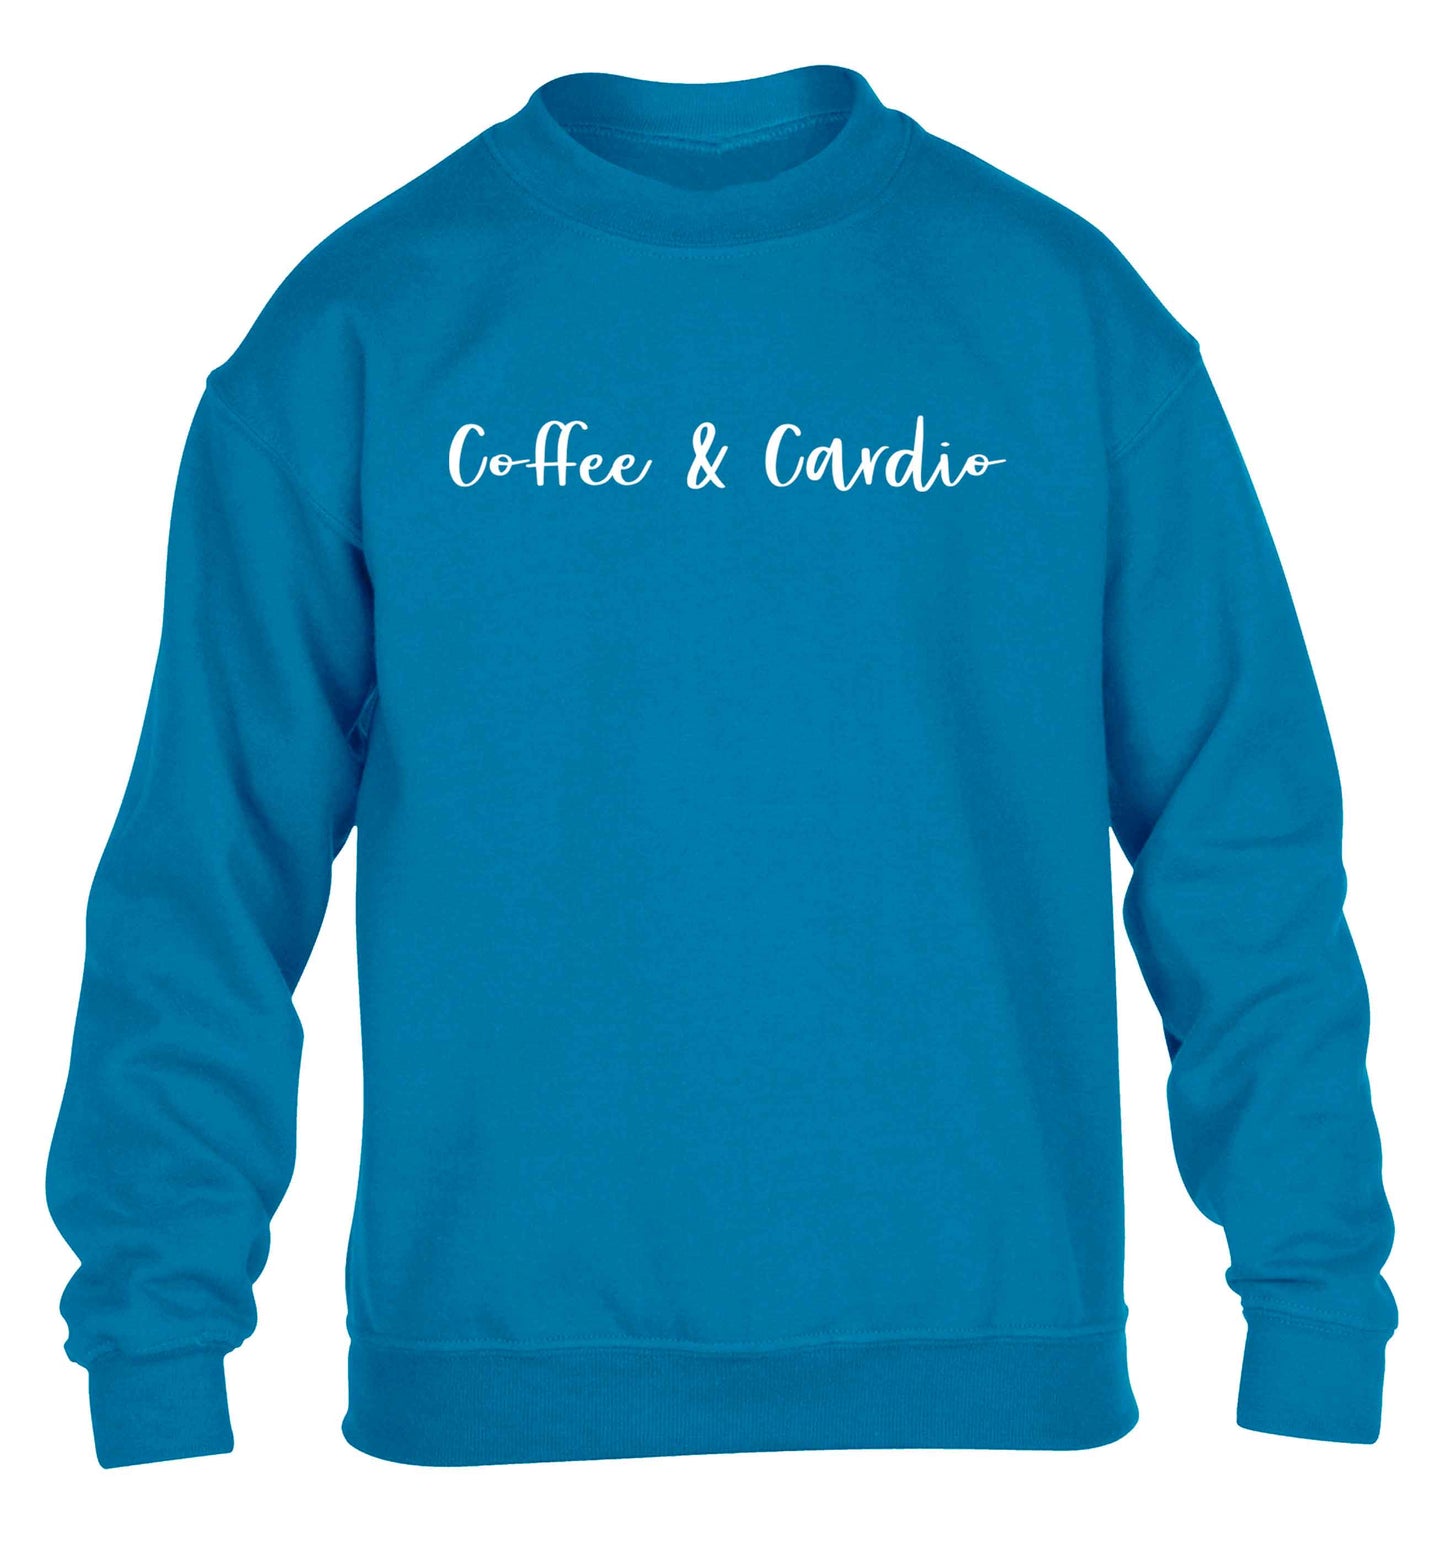 Coffee and cardio children's blue sweater 12-13 Years